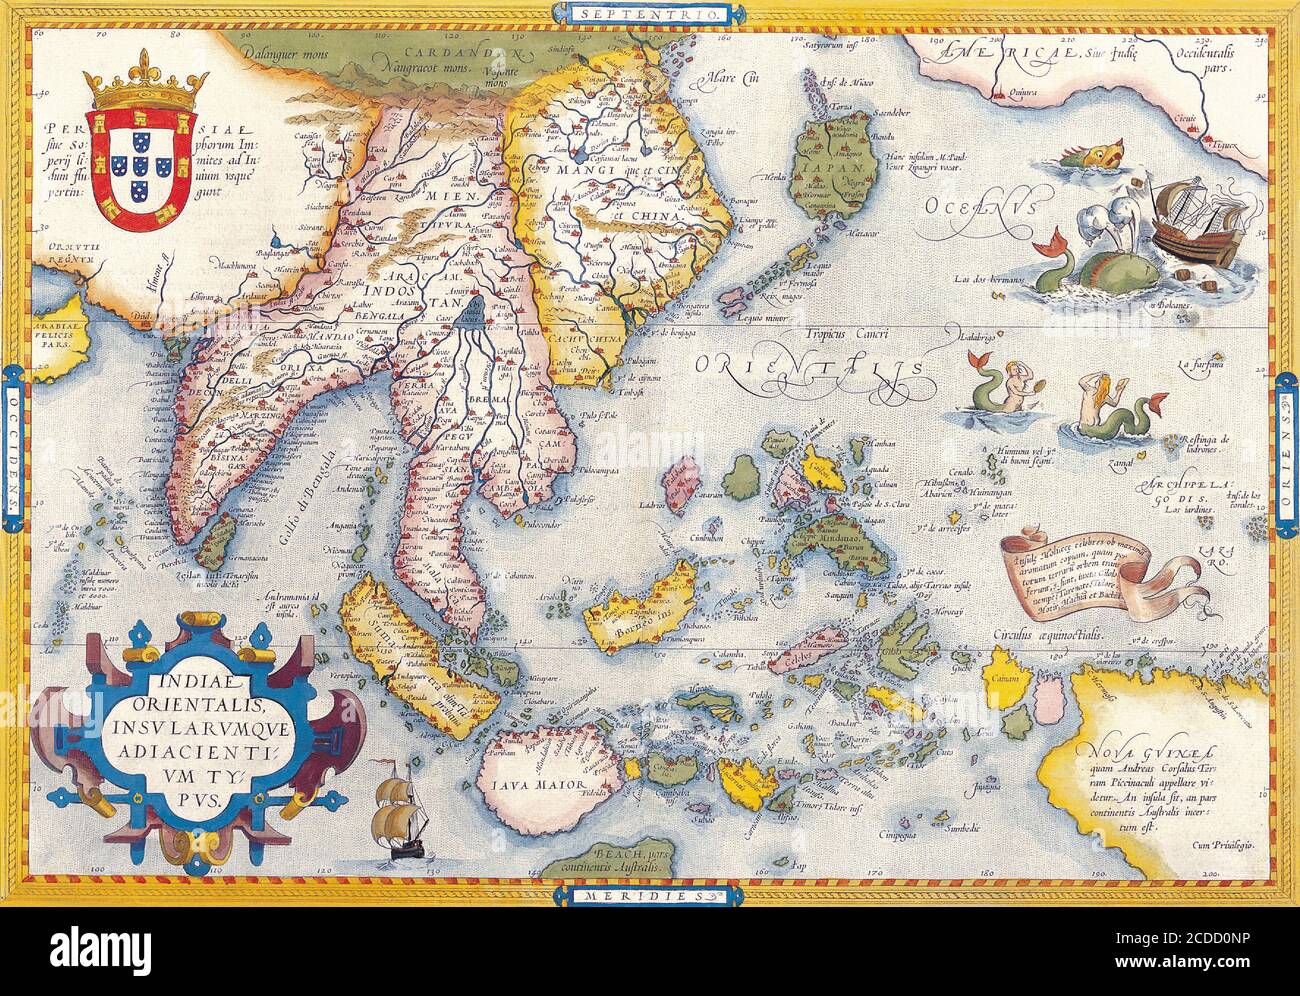 Antique map of the world once upon a time Stock Photo